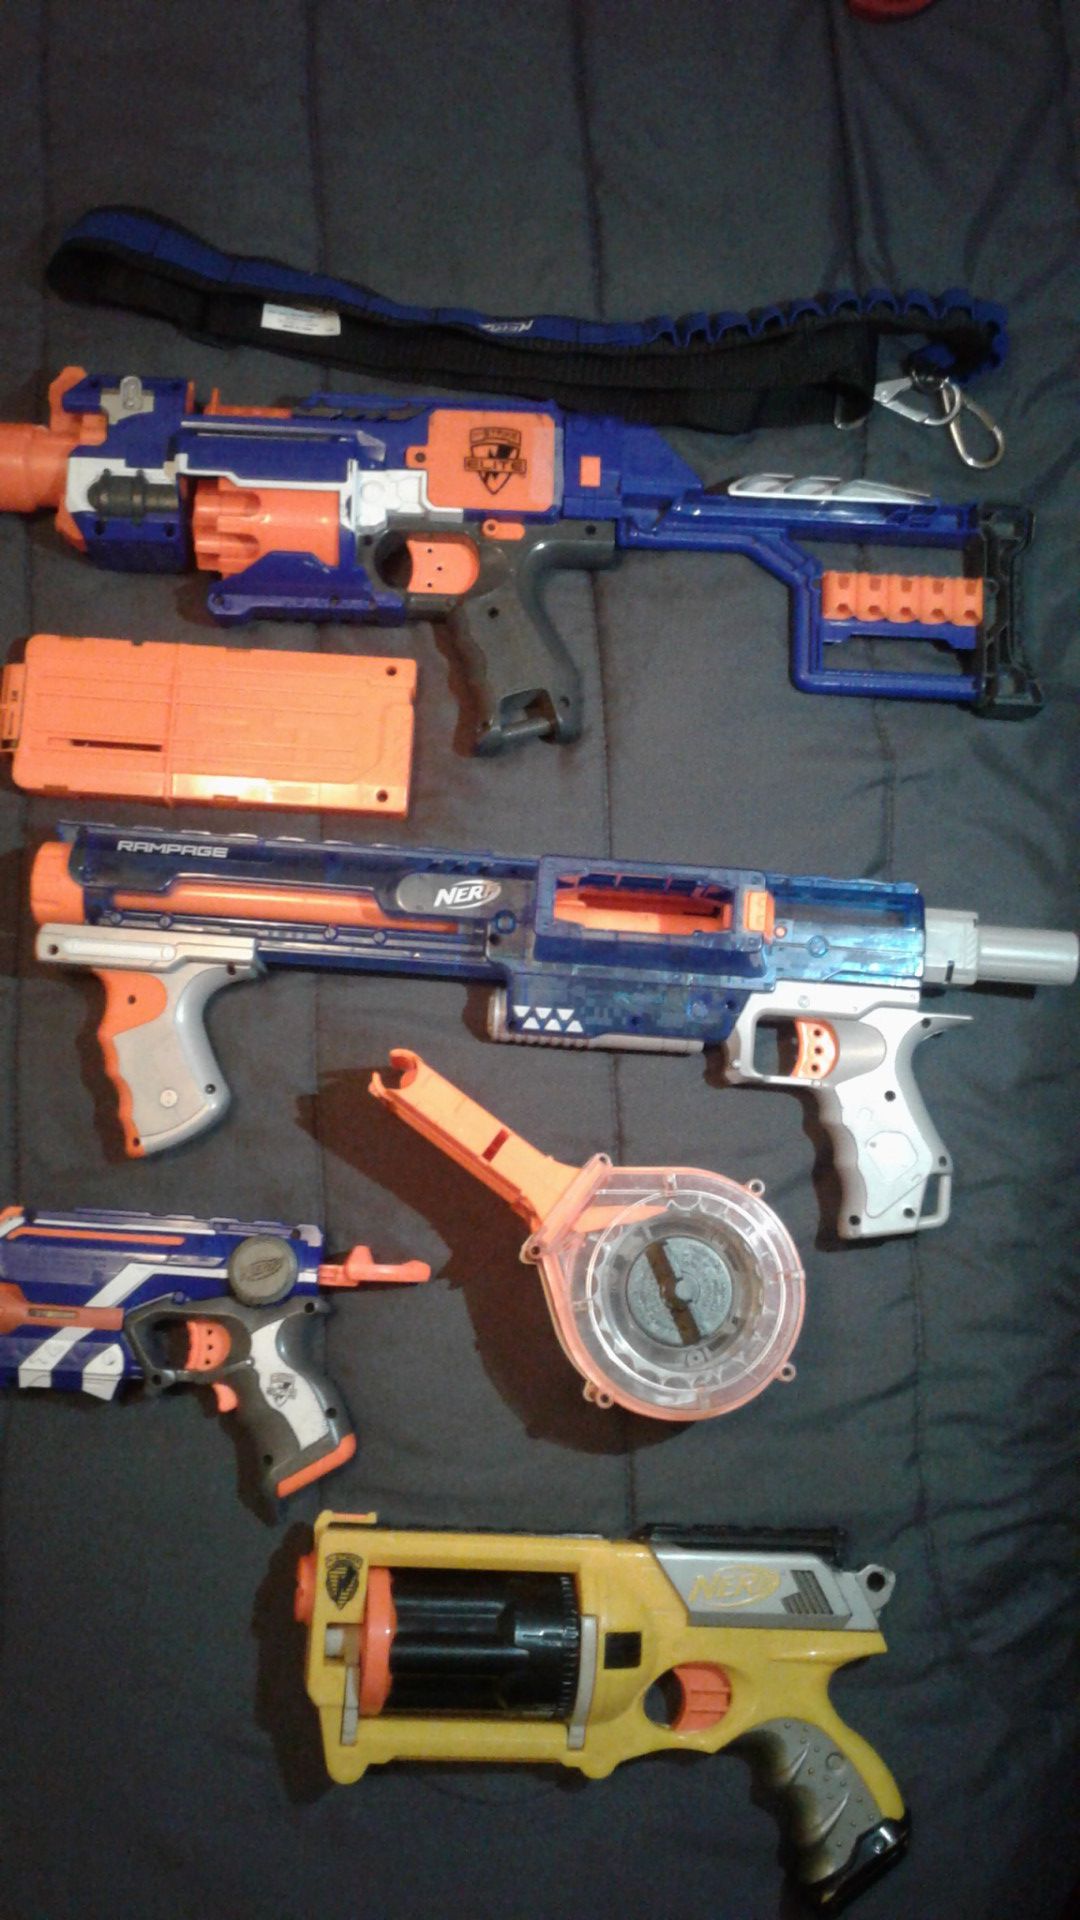 4 nerf guns+2 mags, and a strap for bullets+25 bullets